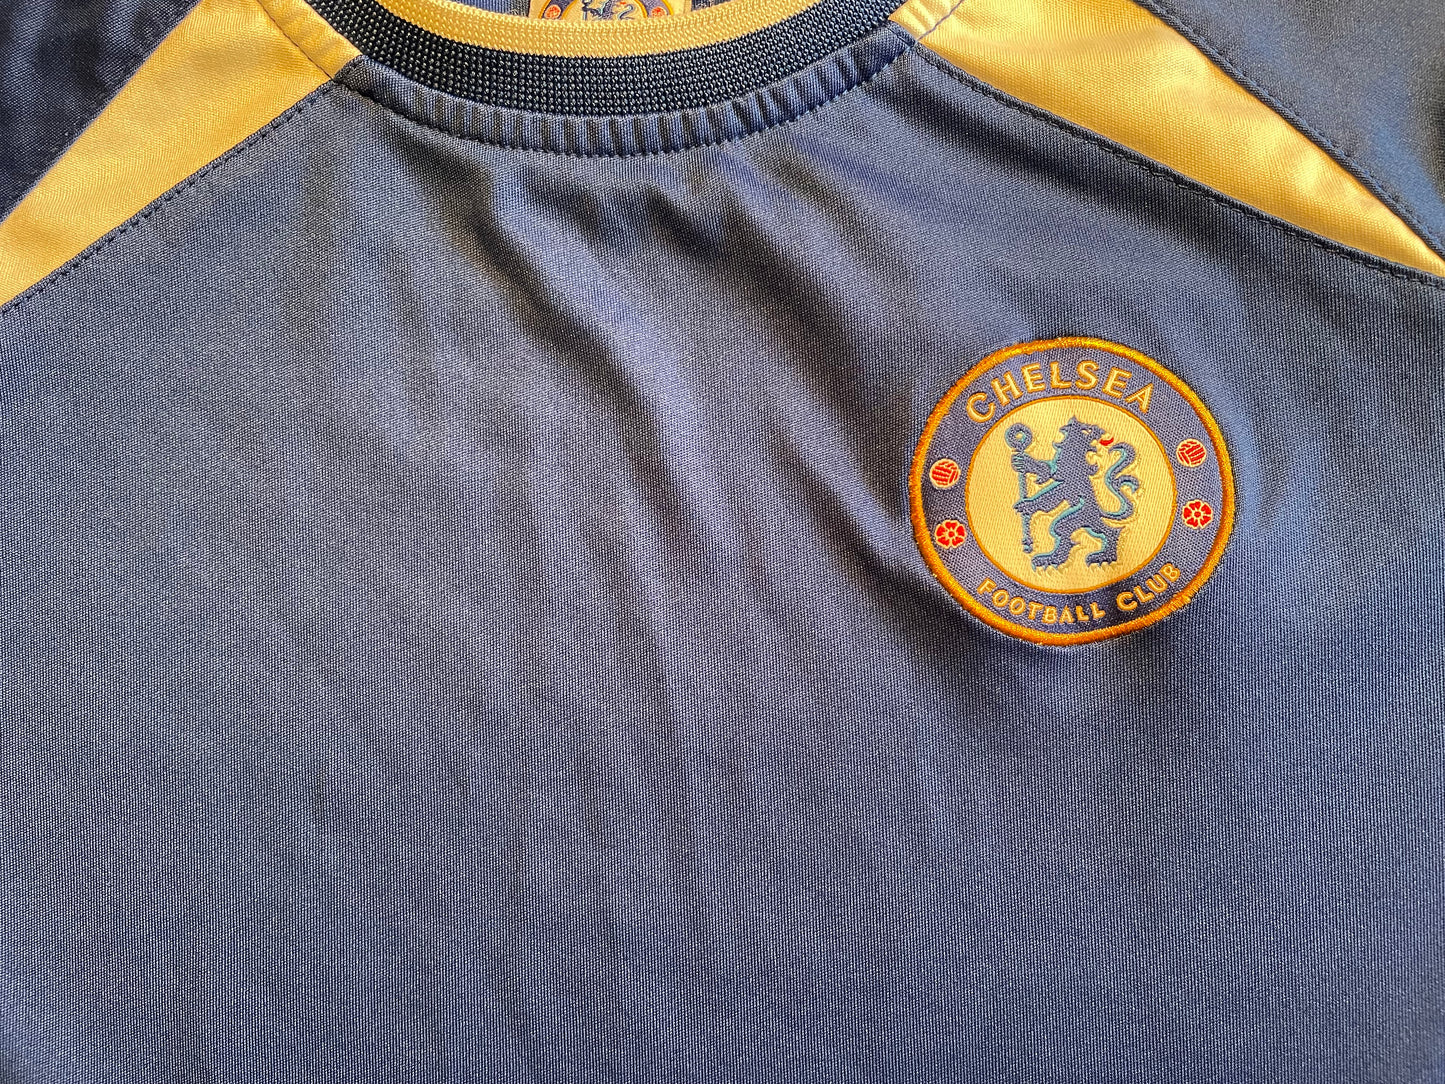 Chelsea Fan Shirt (excellent) AdultsXXS/Large Boys. Height 19 inches